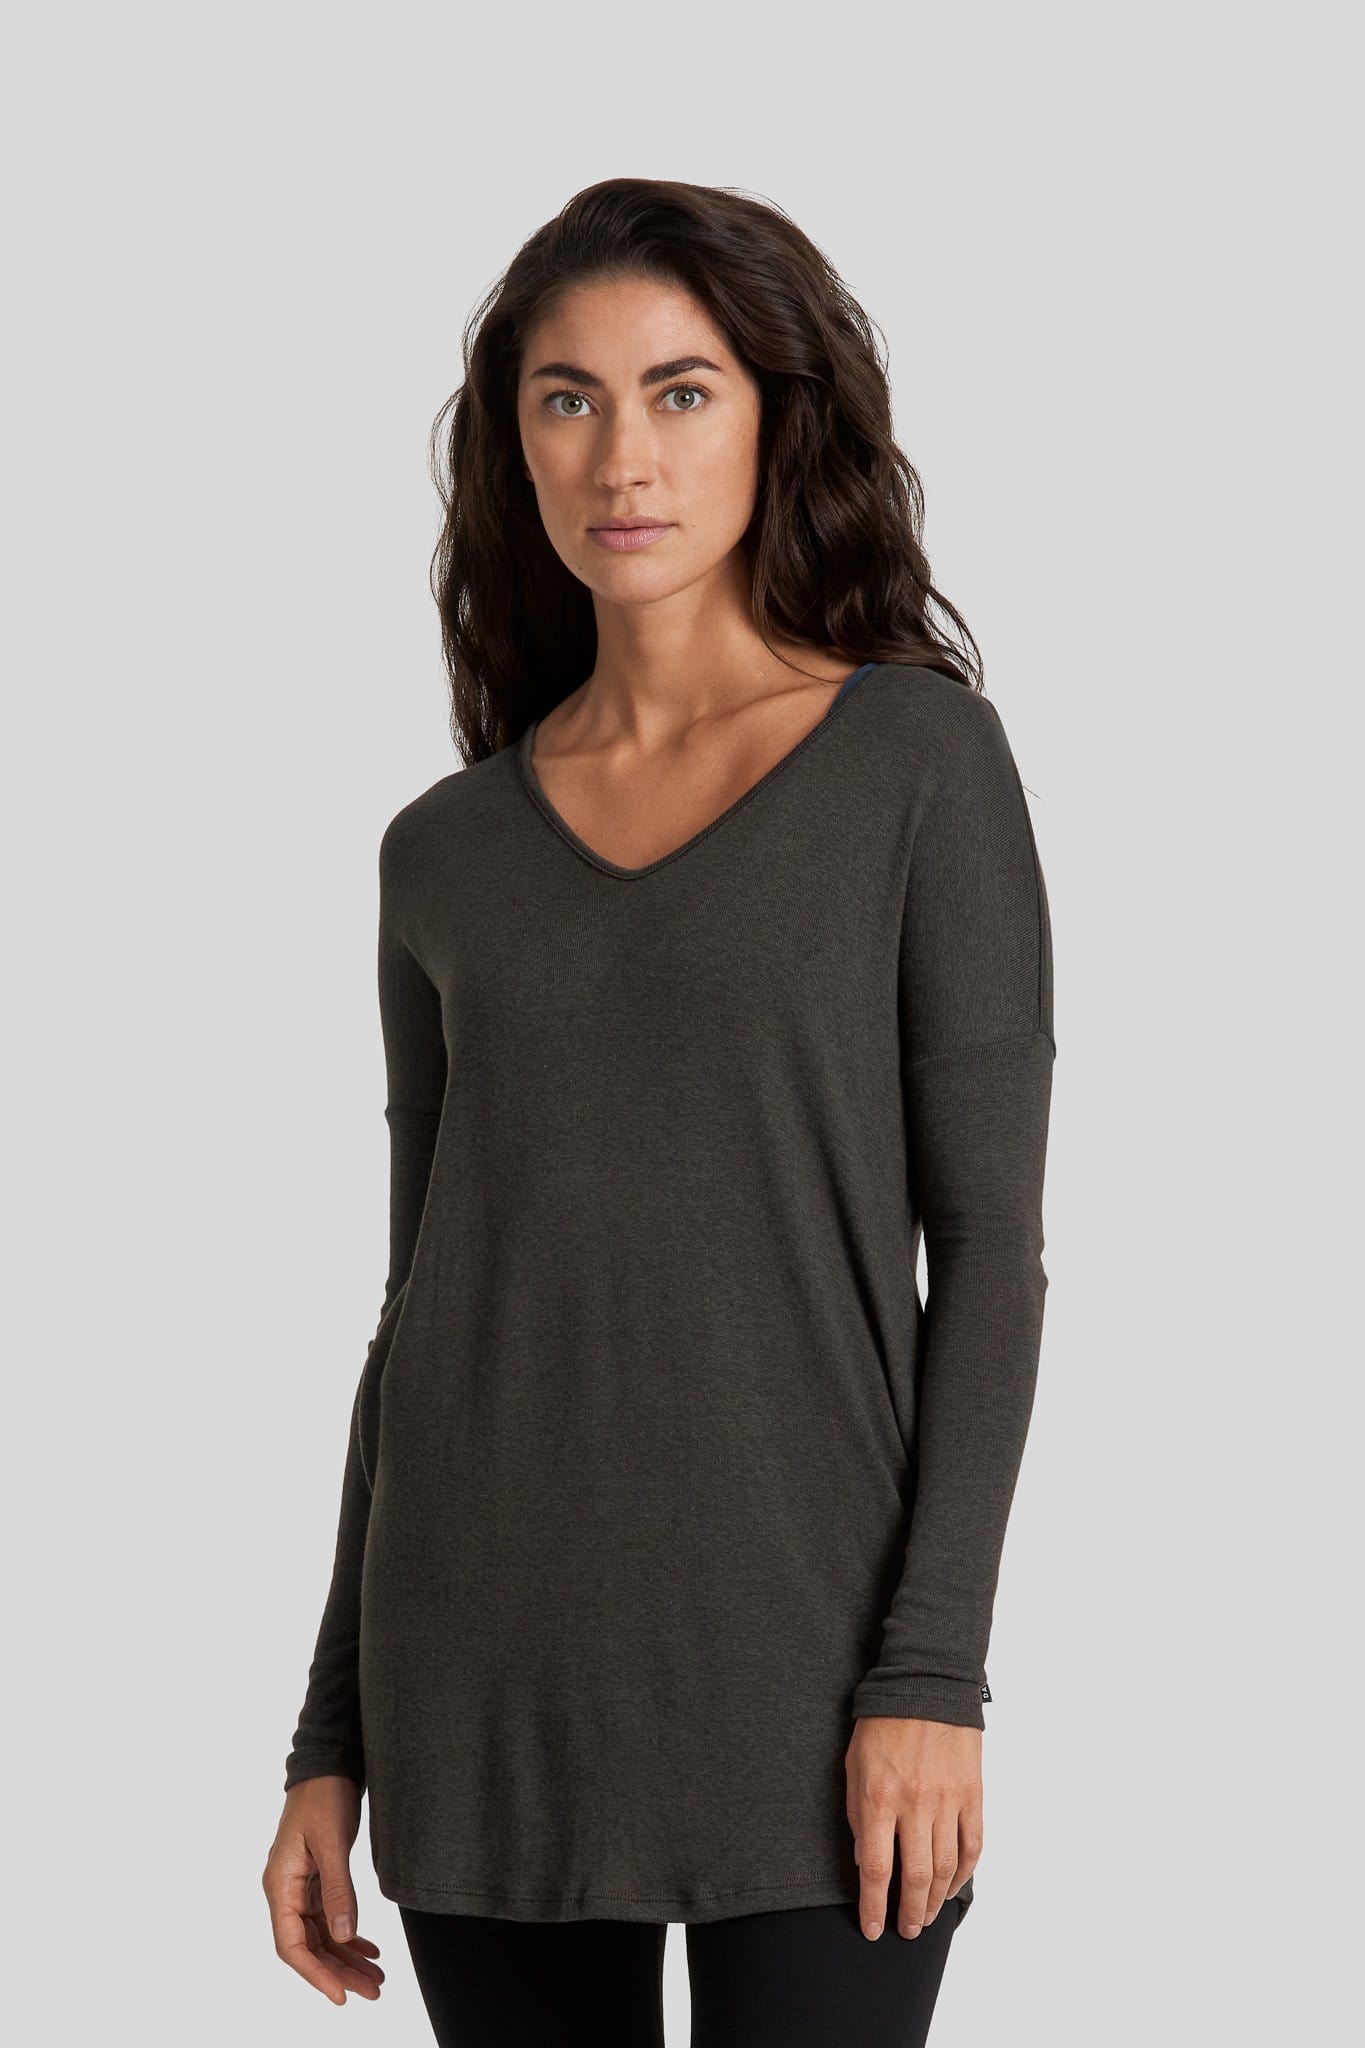 Women wearing an The Ivy Marie Tunic and black leggings.